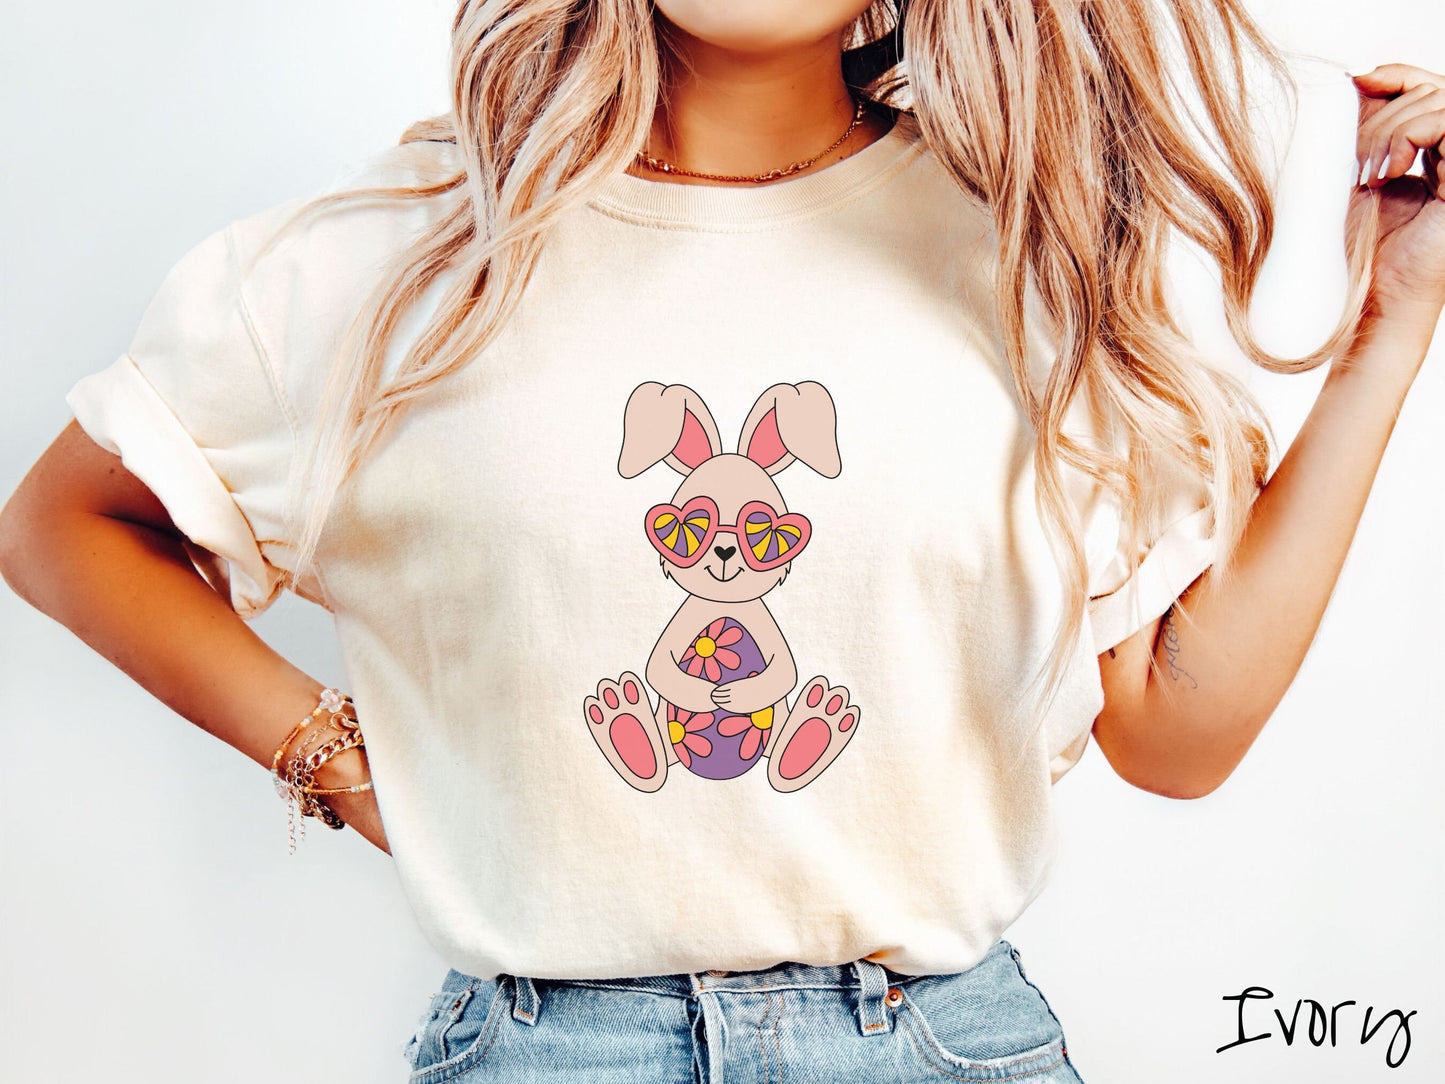 A woman wearing a cute, vintage ivory colored shirt with a smiling ivory and pink colored rabbit holding a large purple Easter egg with pink flowers. The rabbit is wearing heart-shaped pink glasses and has a heart-shaped nose.